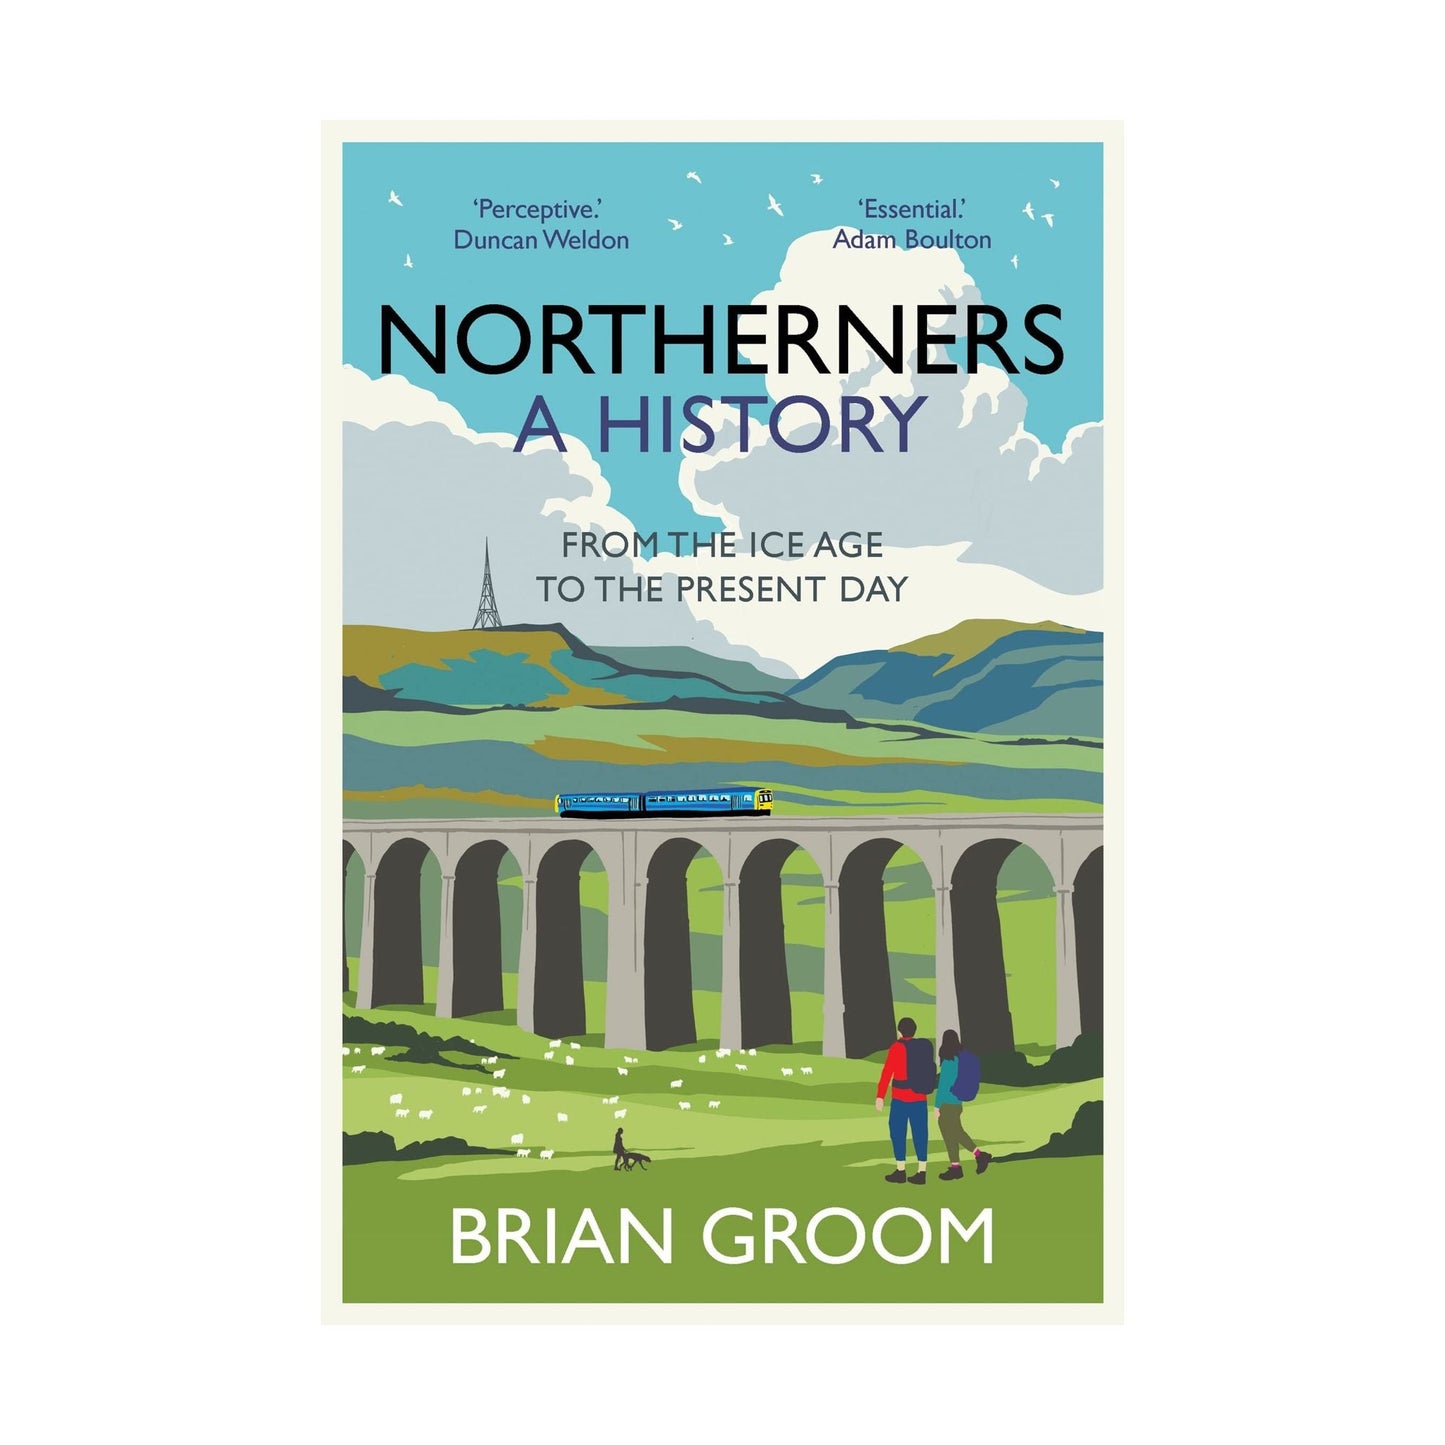 Northerners: A History From the Ice Age to the Present Day